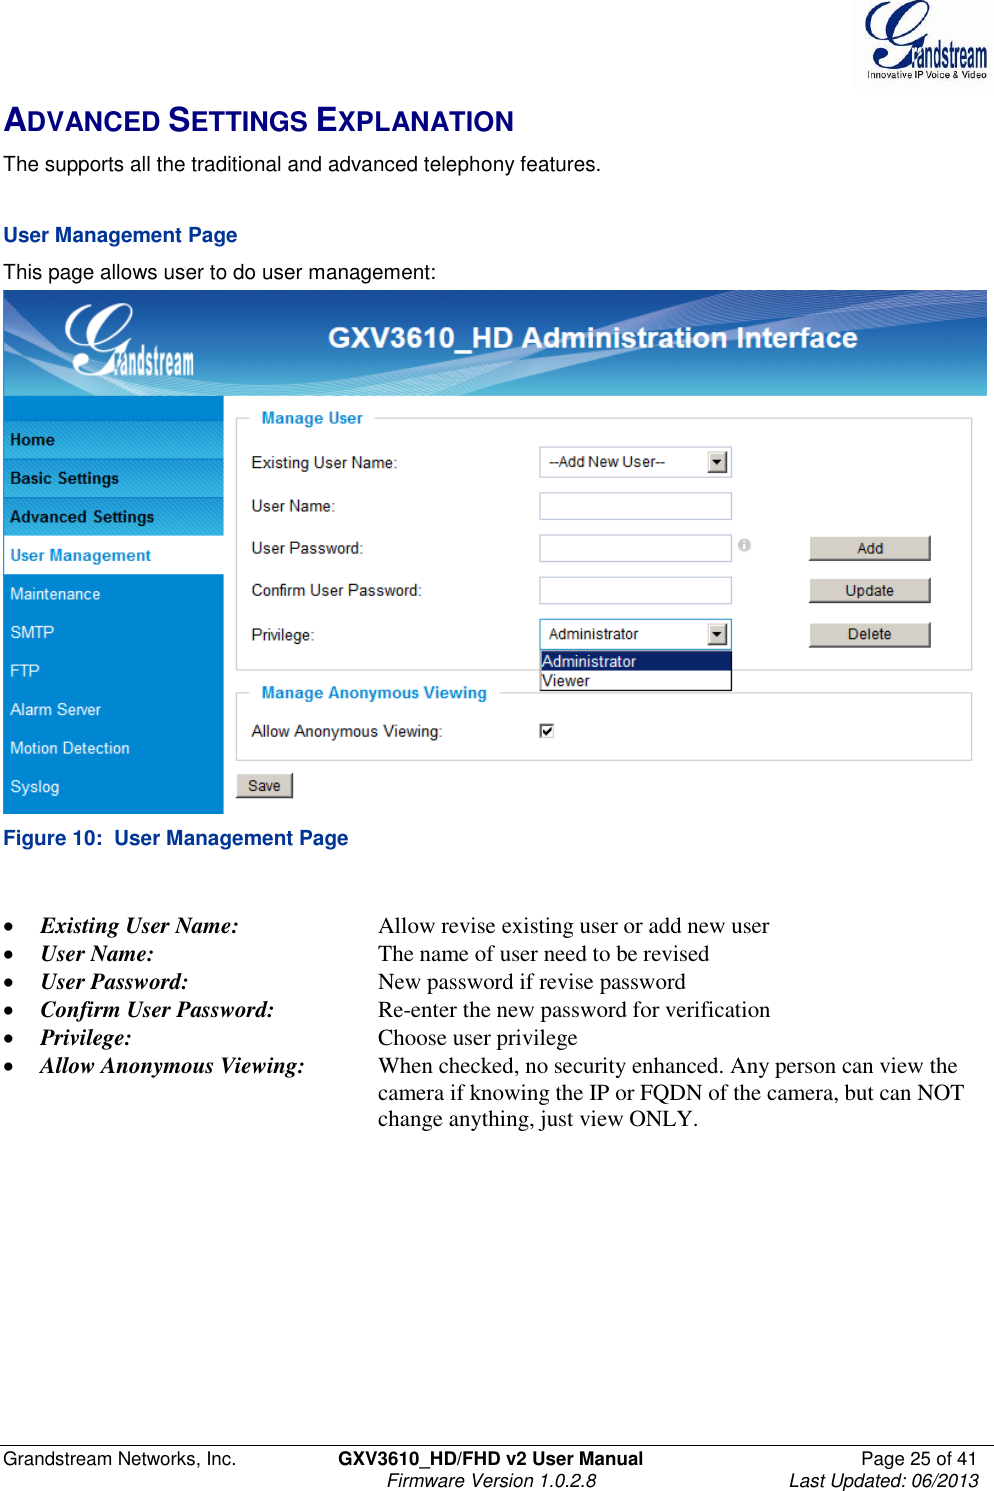  Grandstream Networks, Inc.  GXV3610_HD/FHD v2 User Manual  Page 25 of 41    Firmware Version 1.0.2.8  Last Updated: 06/2013  ADVANCED SETTINGS EXPLANATION The supports all the traditional and advanced telephony features.     User Management Page  This page allows user to do user management:  Figure 10:  User Management Page   Existing User Name:     Allow revise existing user or add new user  User Name:      The name of user need to be revised  User Password:       New password if revise password  Confirm User Password:     Re-enter the new password for verification  Privilege:         Choose user privilege  Allow Anonymous Viewing:  When checked, no security enhanced. Any person can view the            camera if knowing the IP or FQDN of the camera, but can NOT            change anything, just view ONLY.    